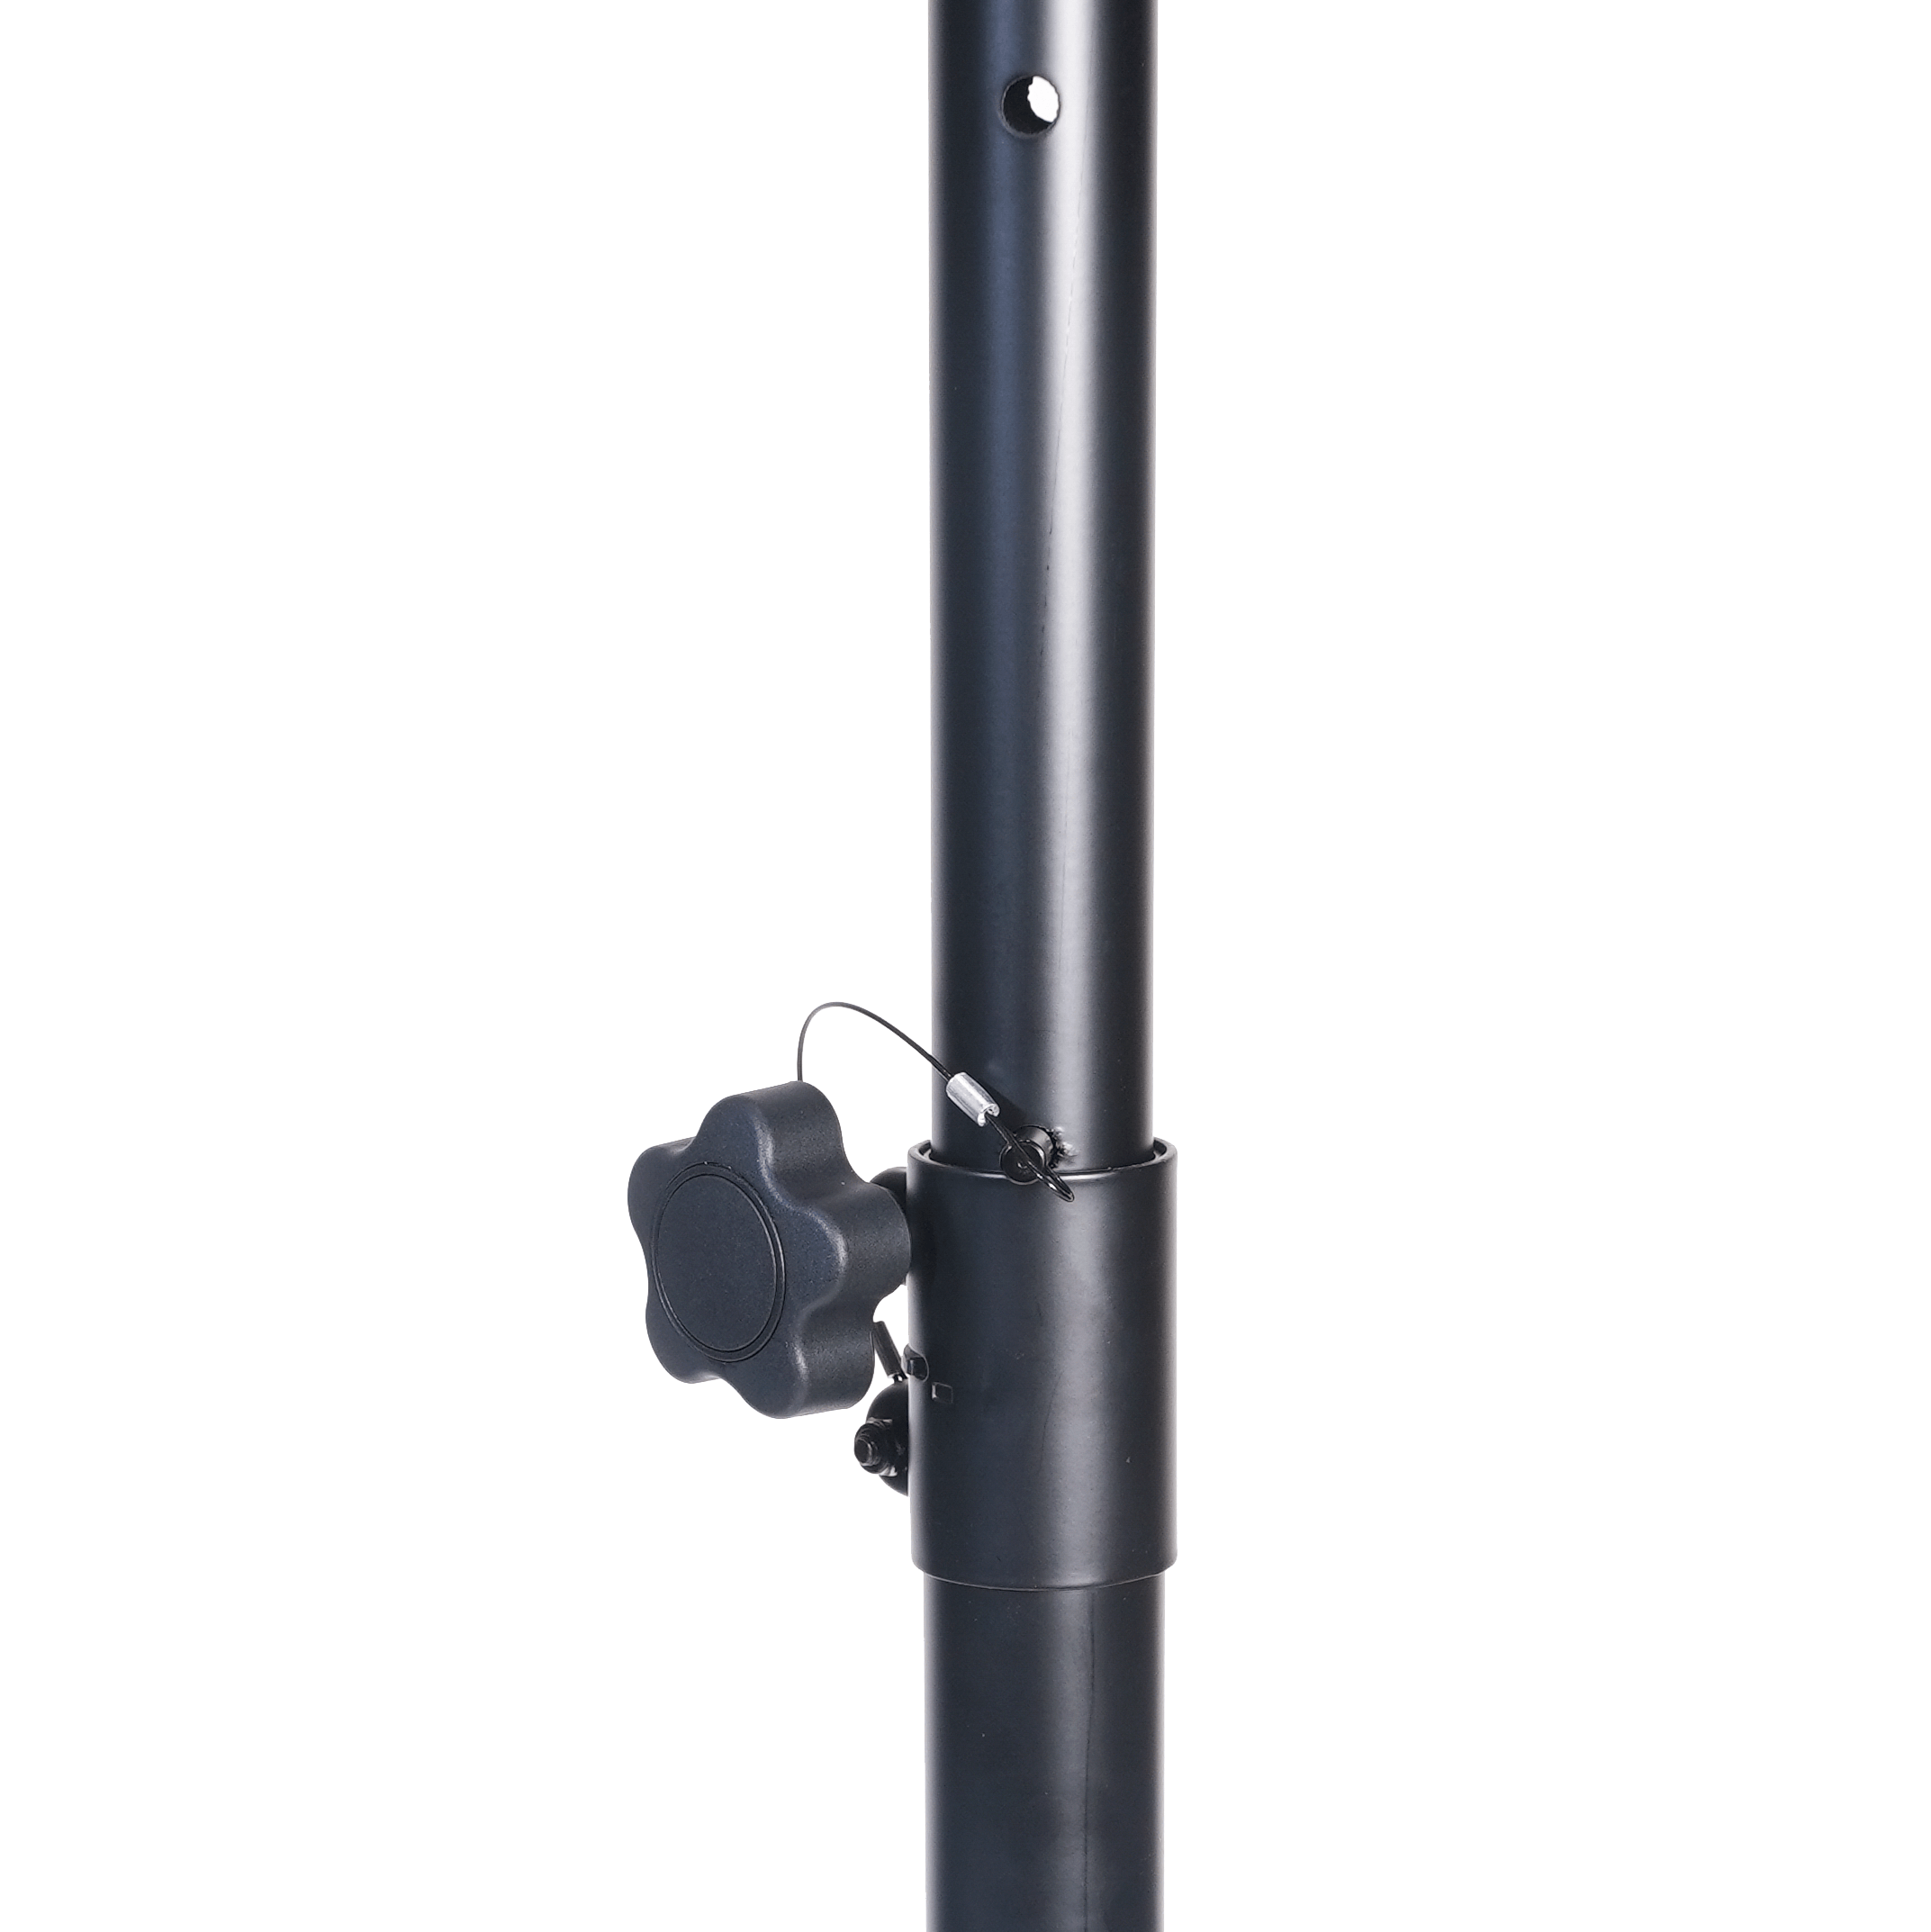 Universal Speaker Stand 6.65 ft • Adjustable Height from 46 in to 80 in • Rated at 150 pounds